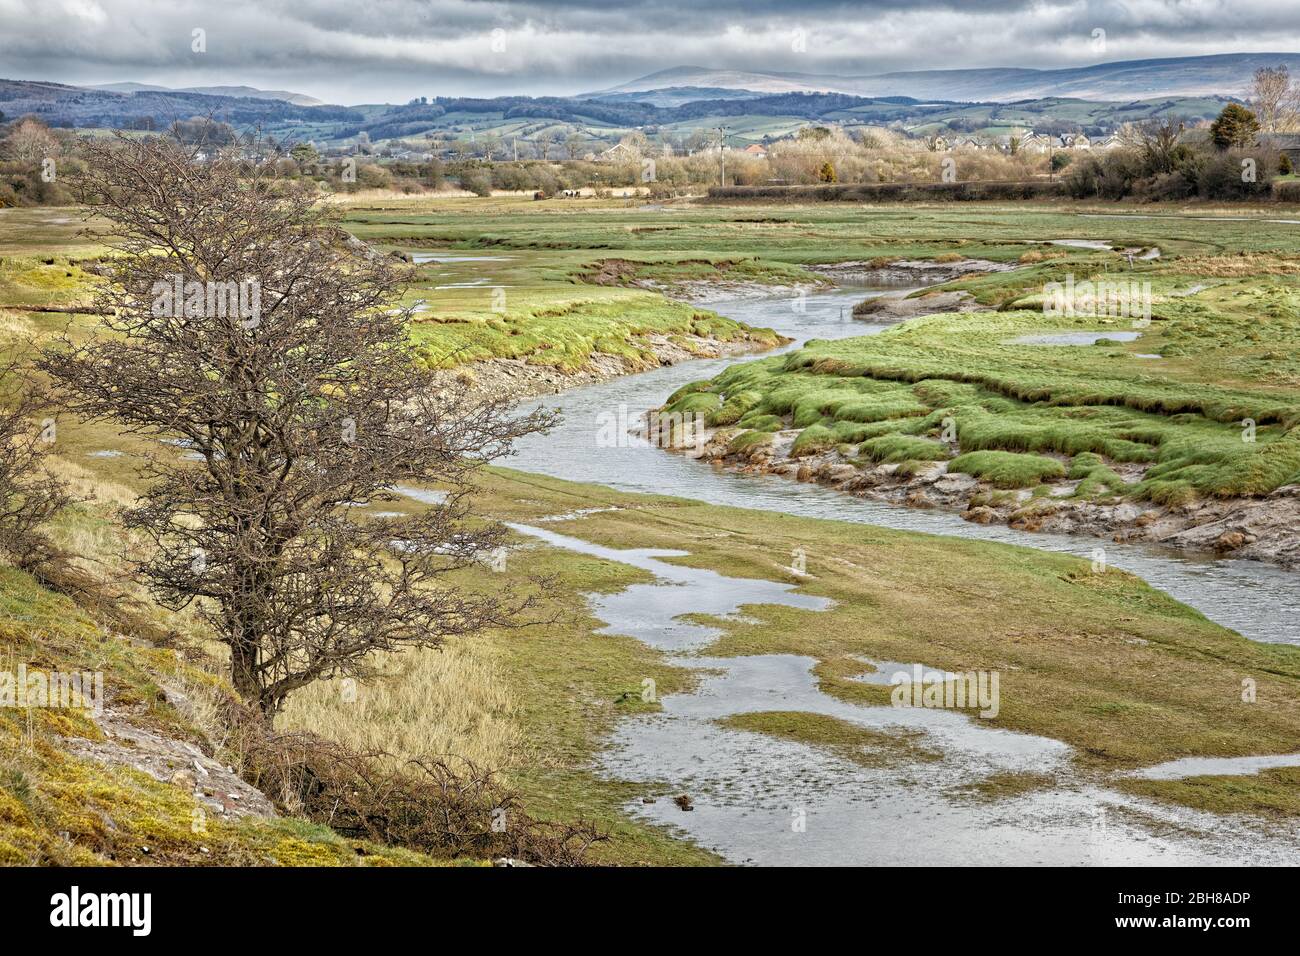 The Lower Reaches Of The River Keer (Carnforth) Stock Photo